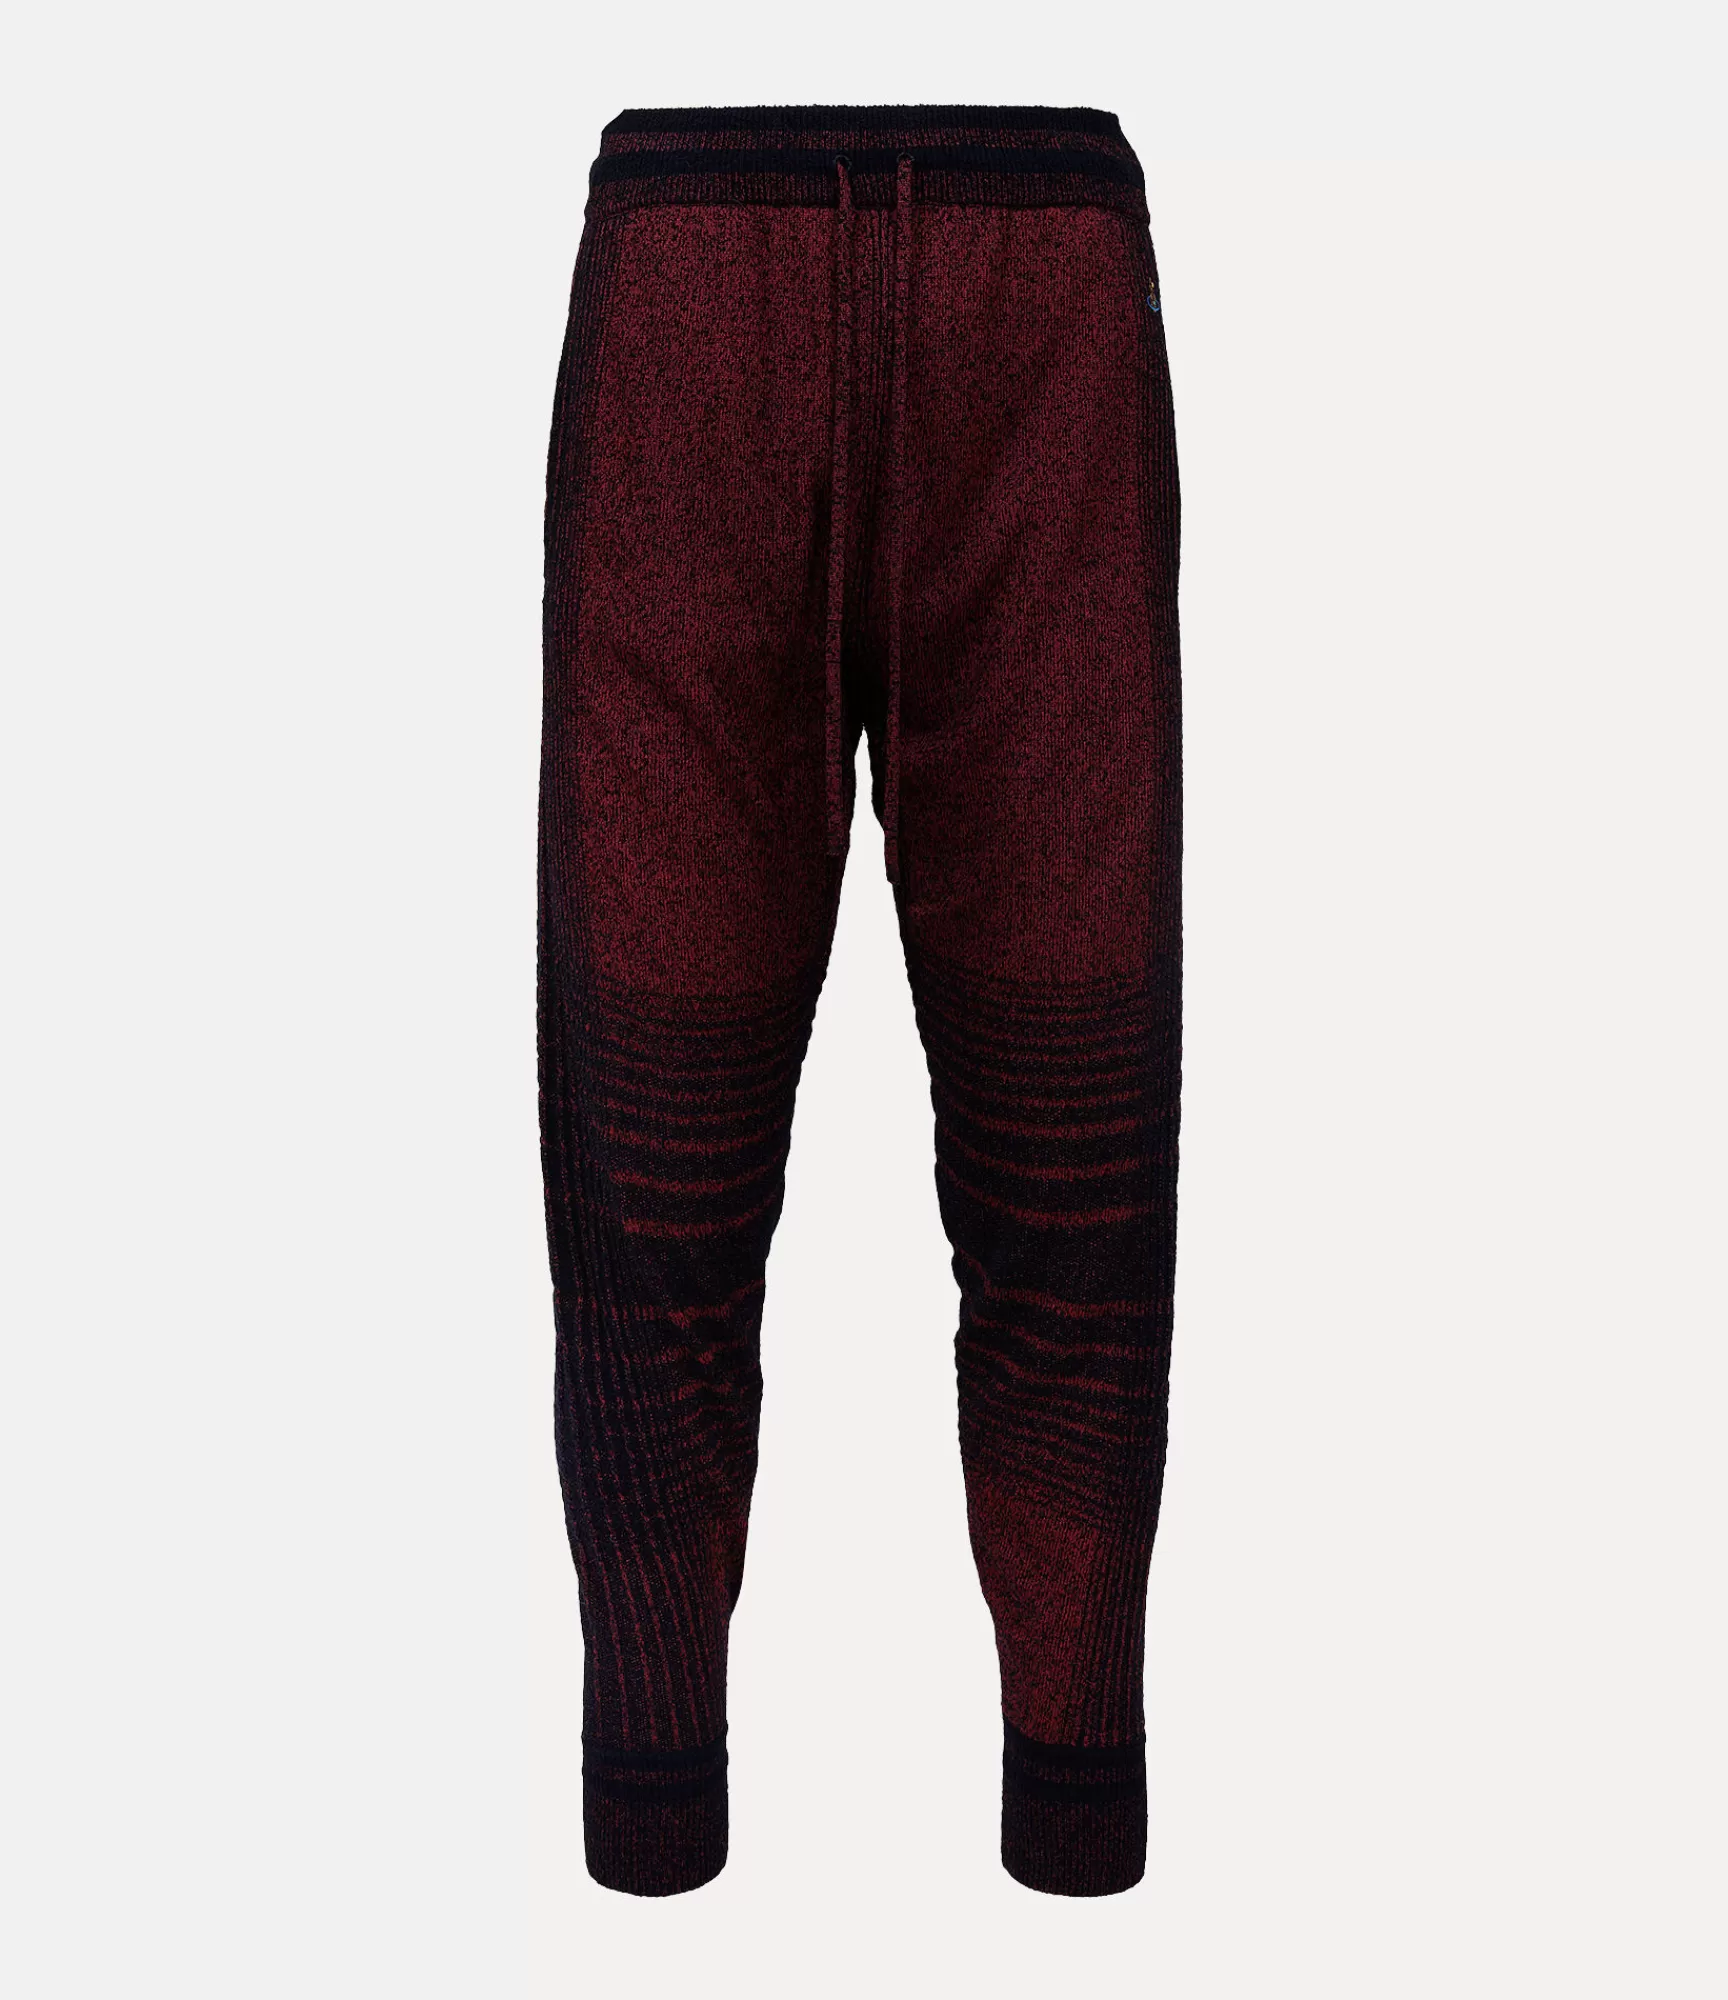 Vivienne Westwood Trousers and Shorts*Madras check trousers Black/red